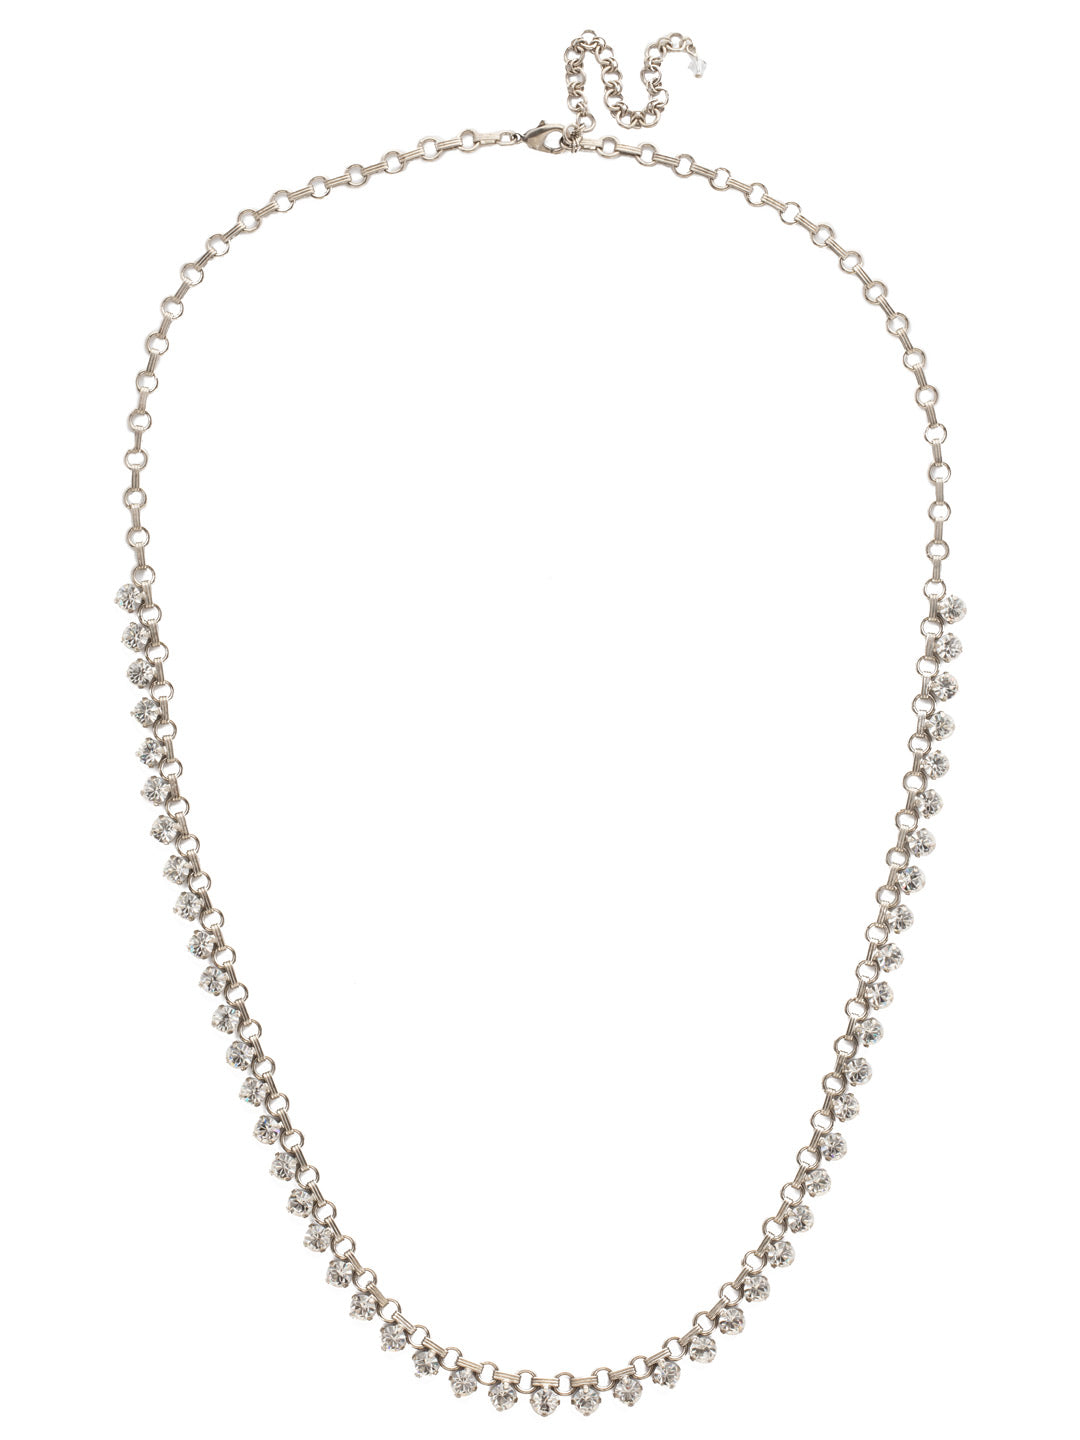 Petite Round Crystal Long Strand - NDE29ASCRY - <p>This long strand features a looped chain adorned with small, round crystals. Wear on its own or add it to your favorite layered look. From Sorrelli's Crystal collection in our Antique Silver-tone finish.</p>